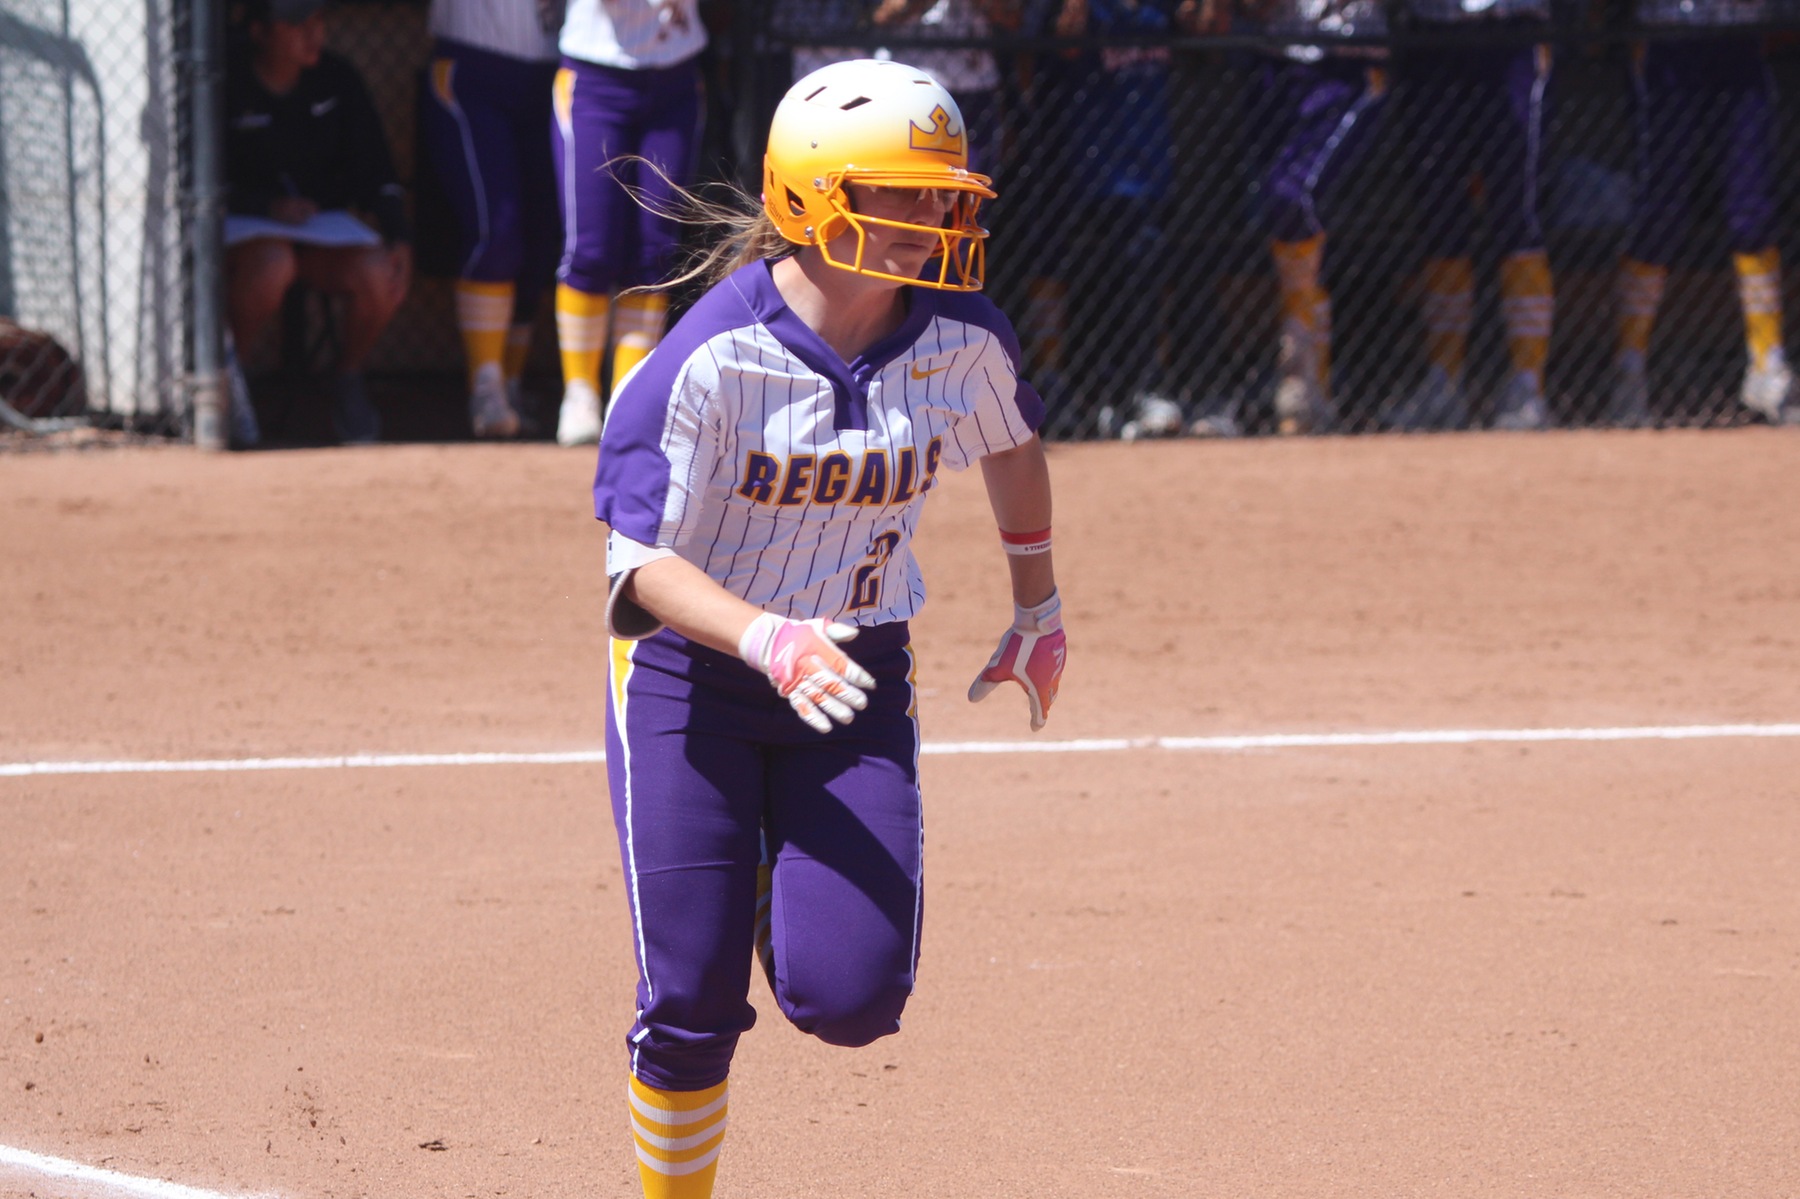 Lauren Salvati tallied four RBI in the doubleheader with Chapman.